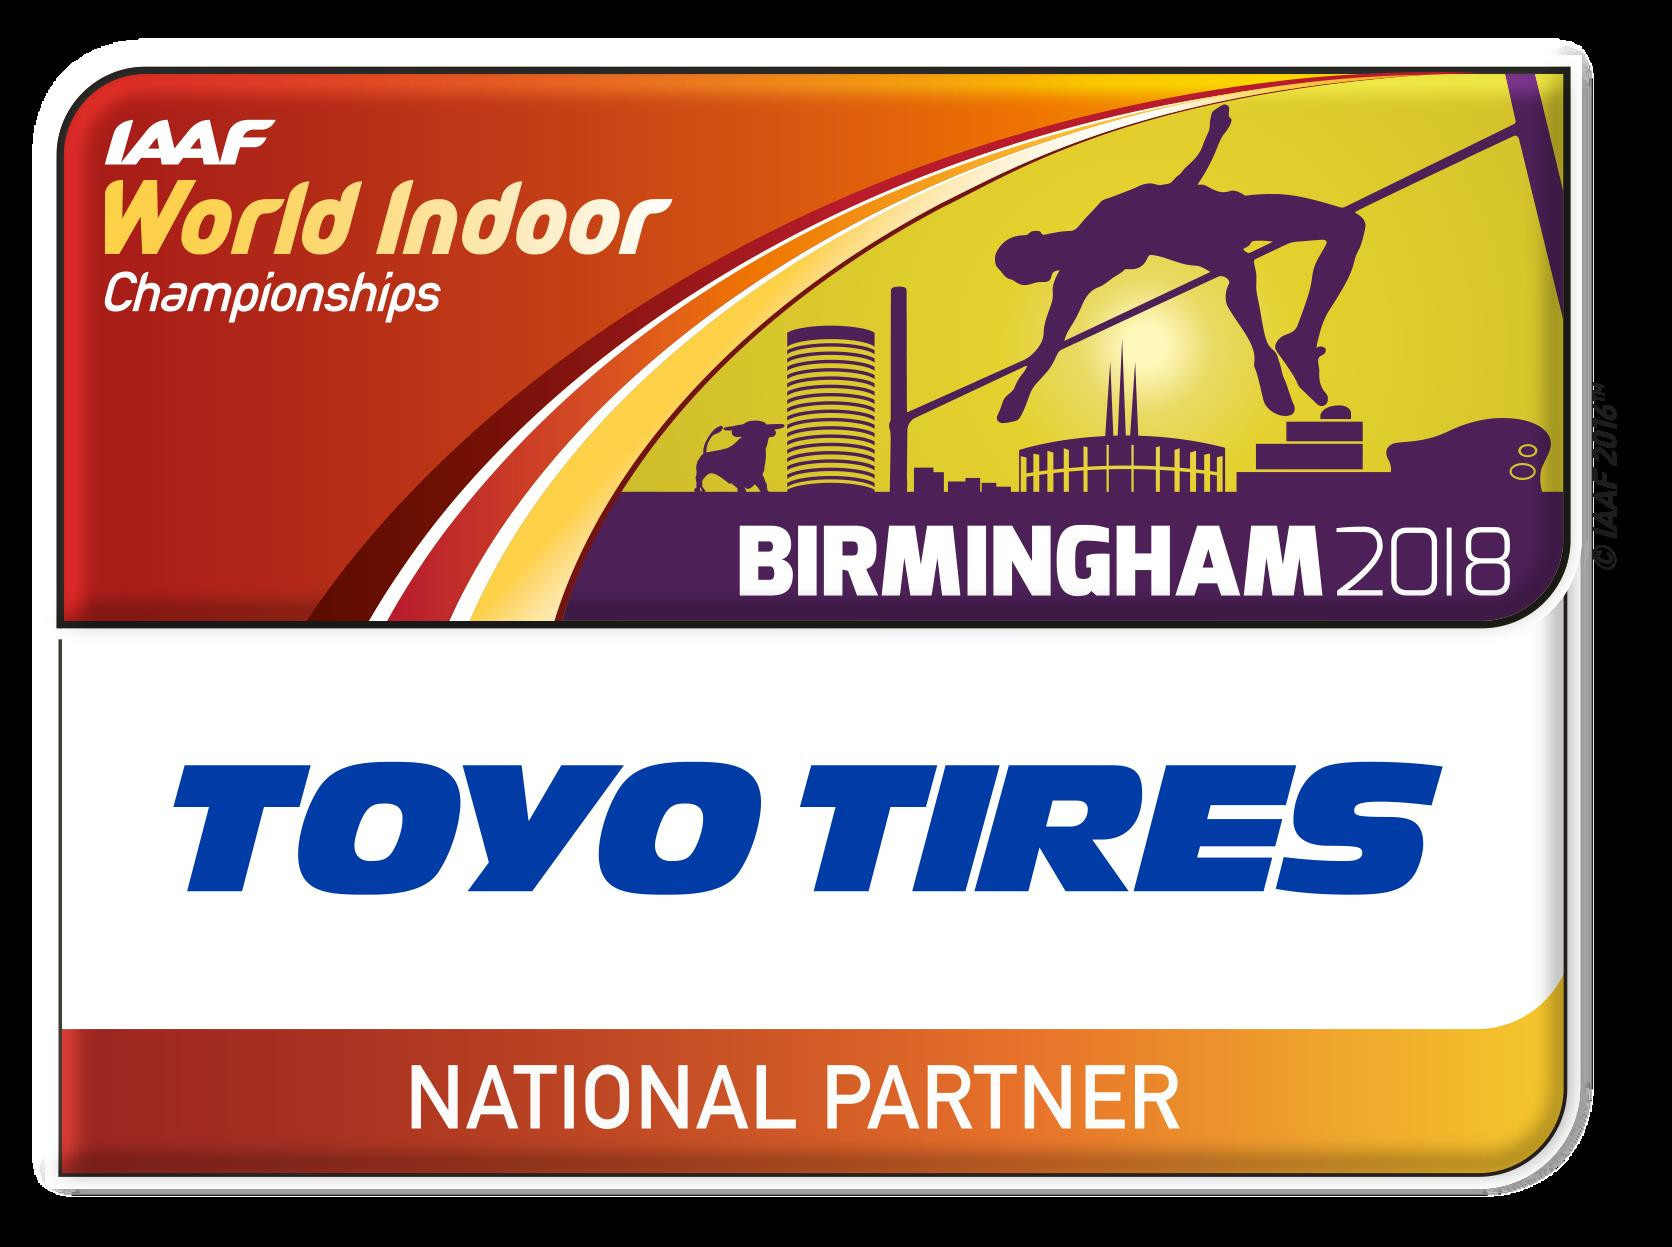 Toyo Tires will continue their association with the IAAF by sponsoring the upcoming World Indoor Championships in Birmingham ©Toyo Tires